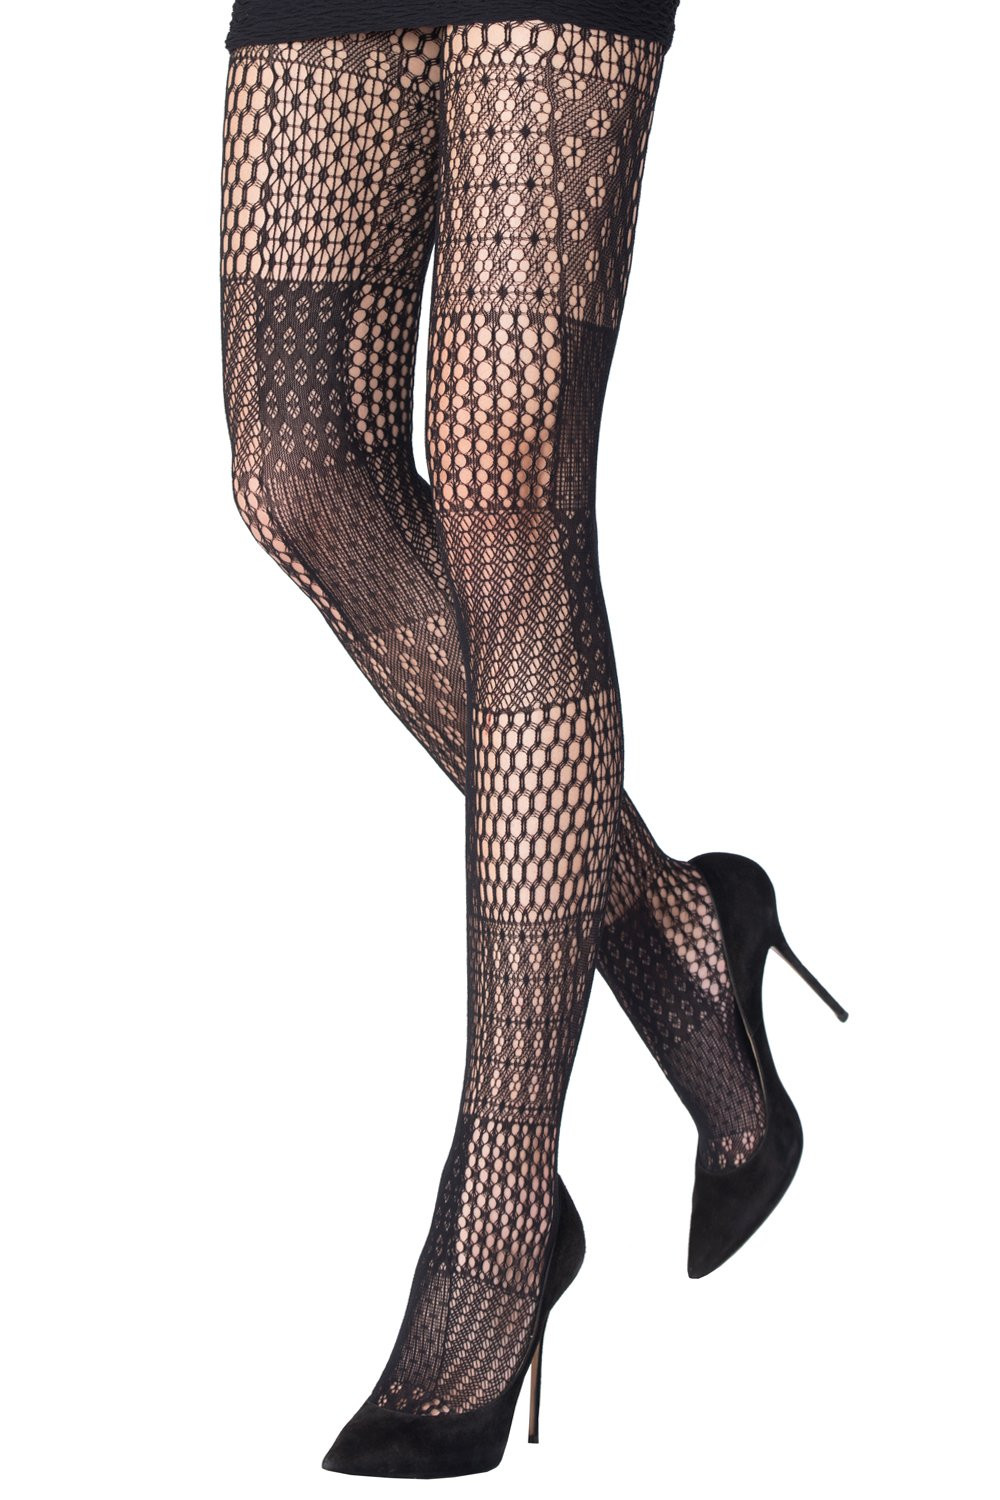 FORSTEEL Women Patterned Fishnet Tights, 2pcs High Waist Fishnet Floral  Stockings, Thigh High Pantyhose Black Butterfly Lovers (Black Butterfly  Lovers) at  Women's Clothing store